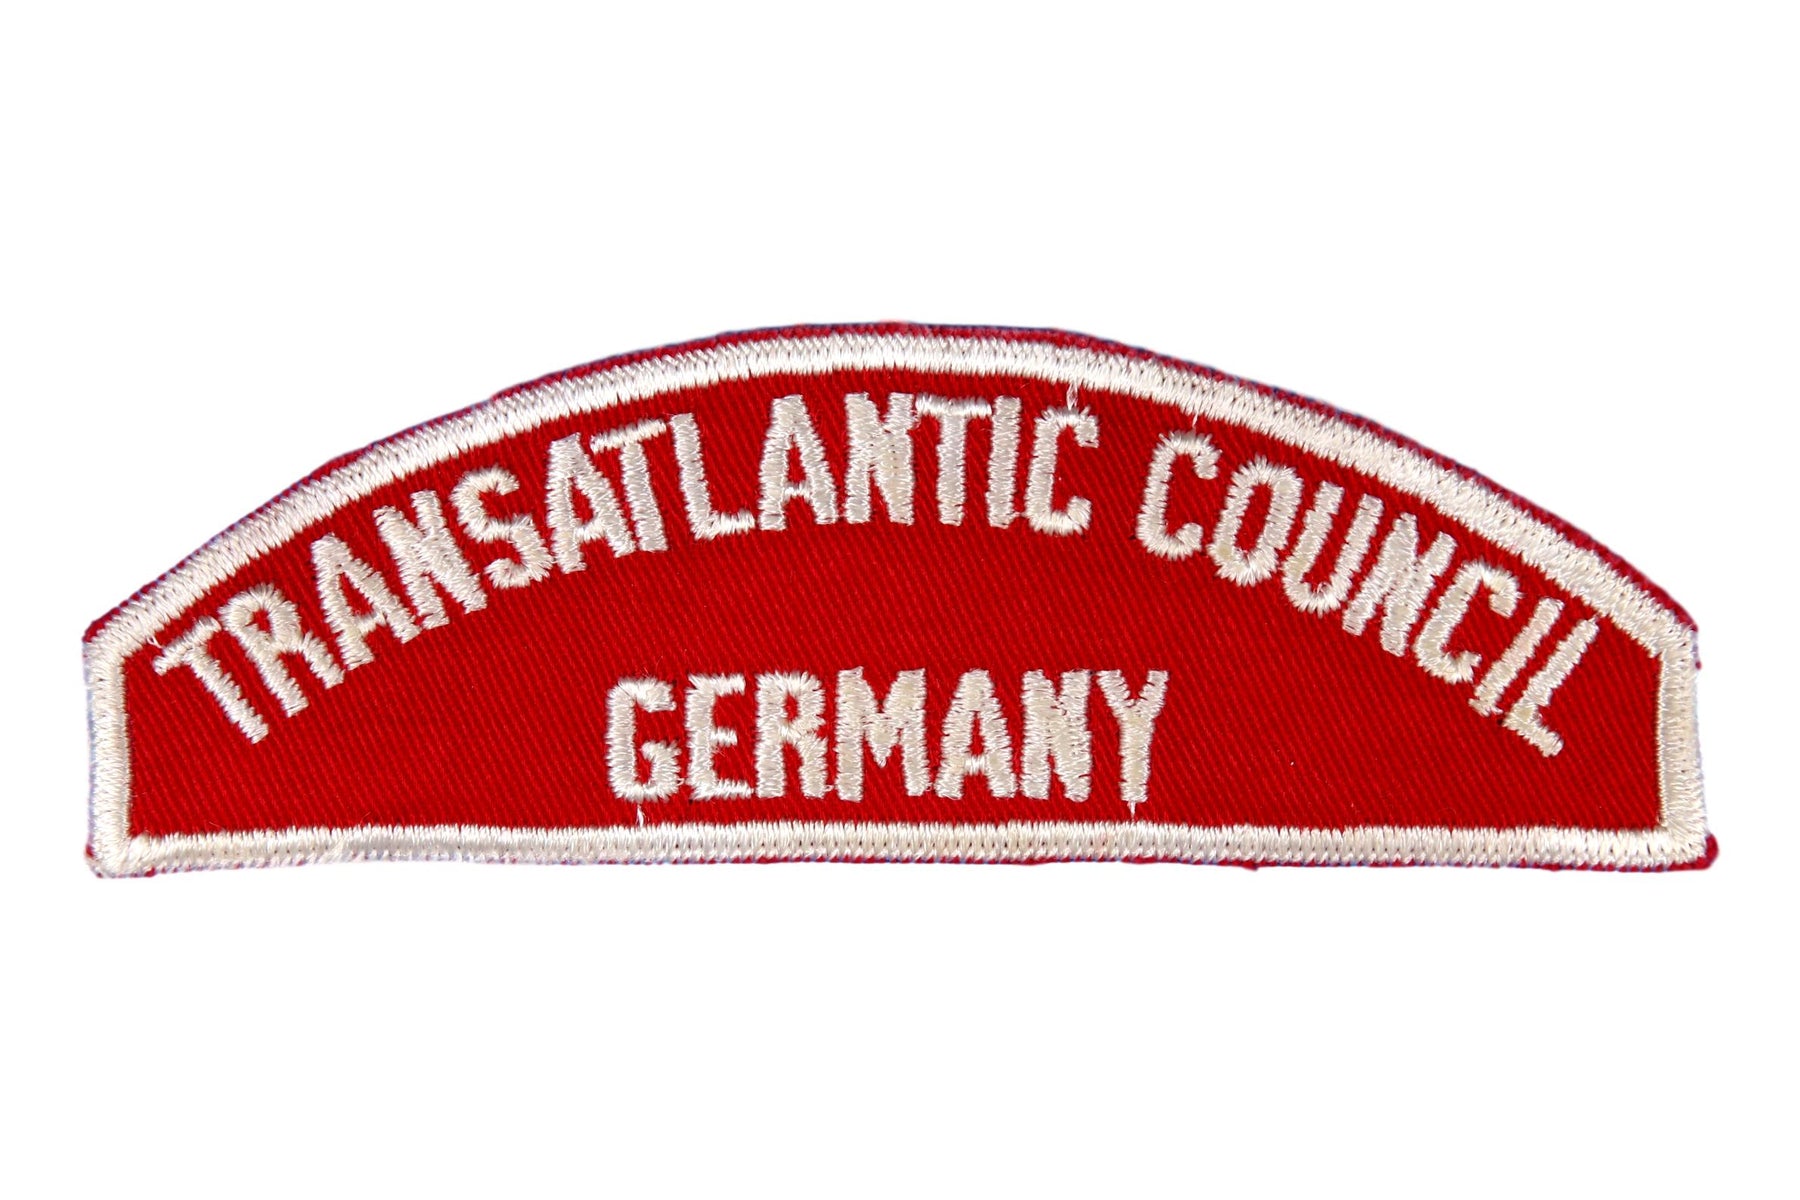 Transatlantic Council/Germany Red and White Council Strip